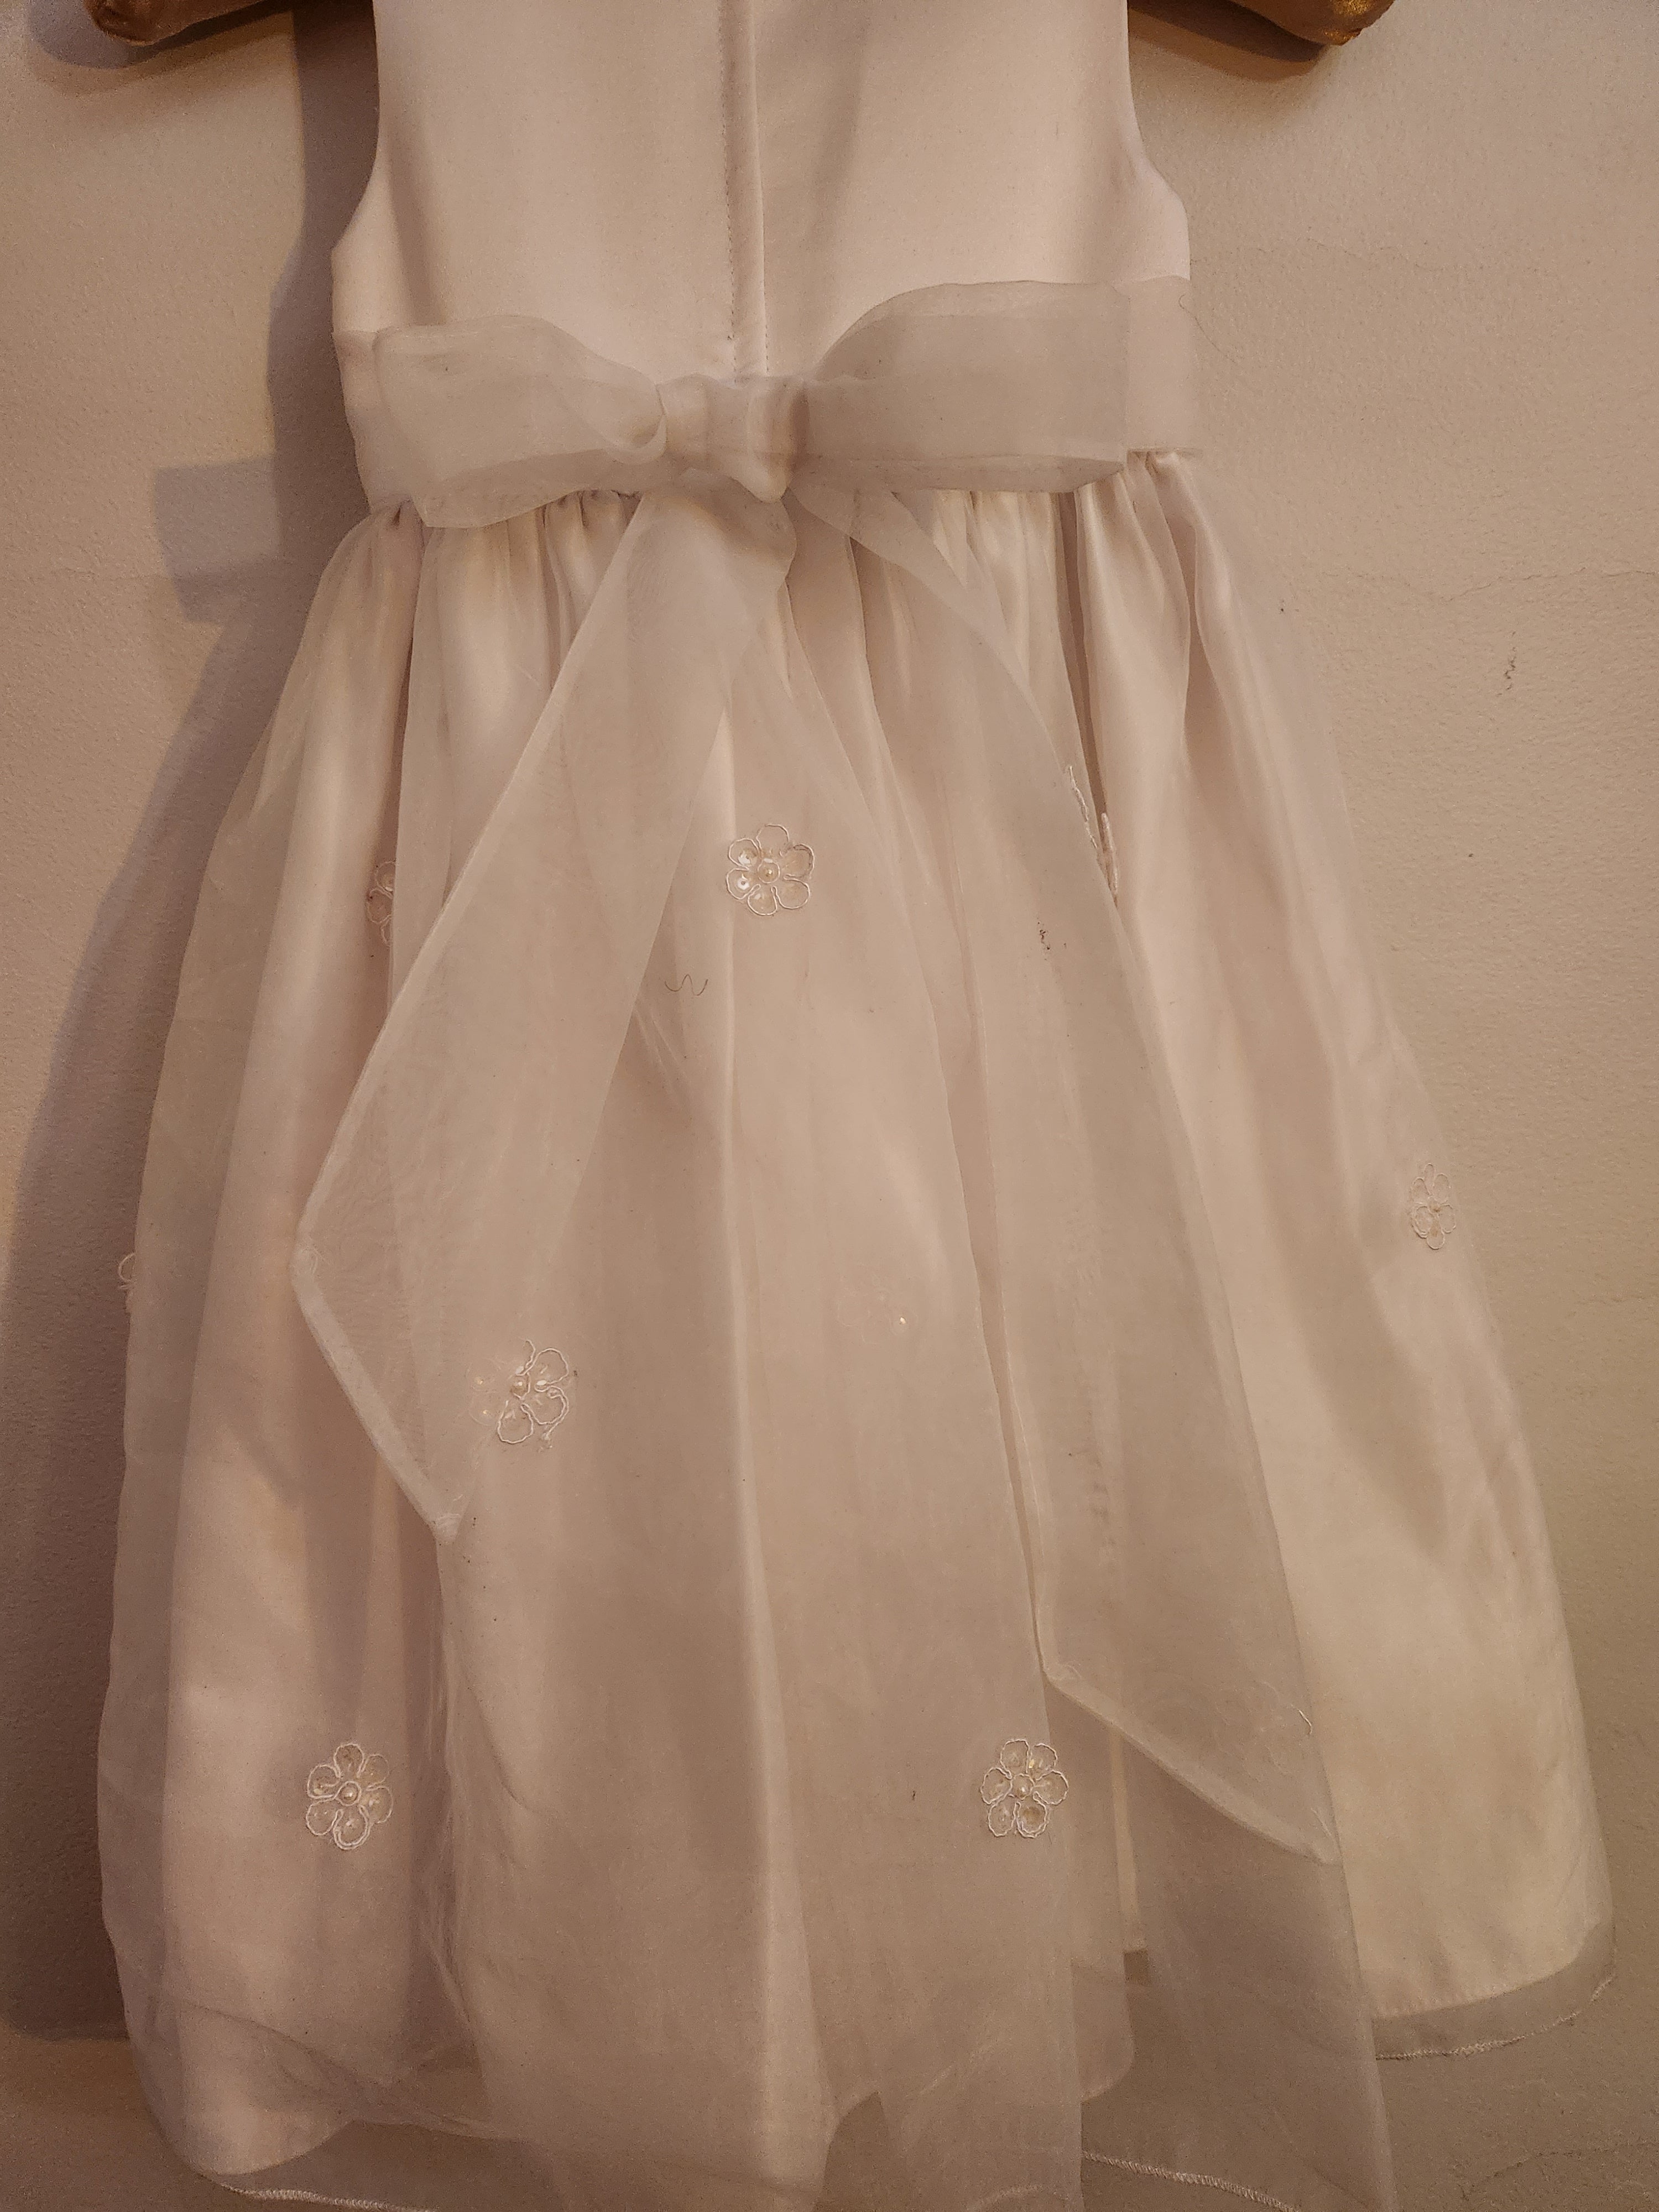 Sophisticated Sarah (Size 8) Girl's Dress